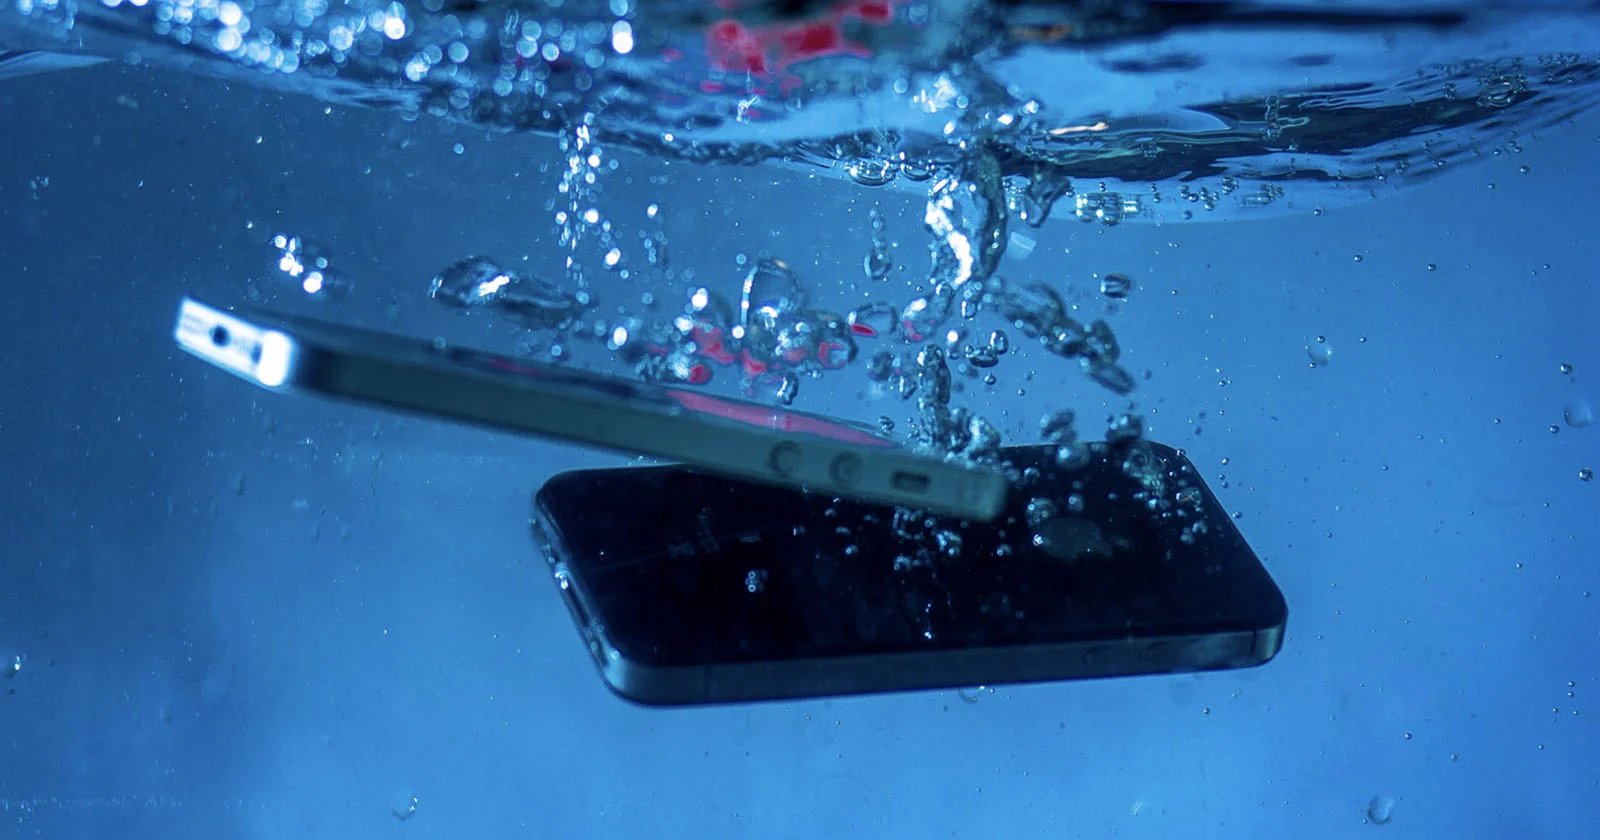 lost-iphone-found-by-disney-employee-still-works-after-being-under-water-for-2-months